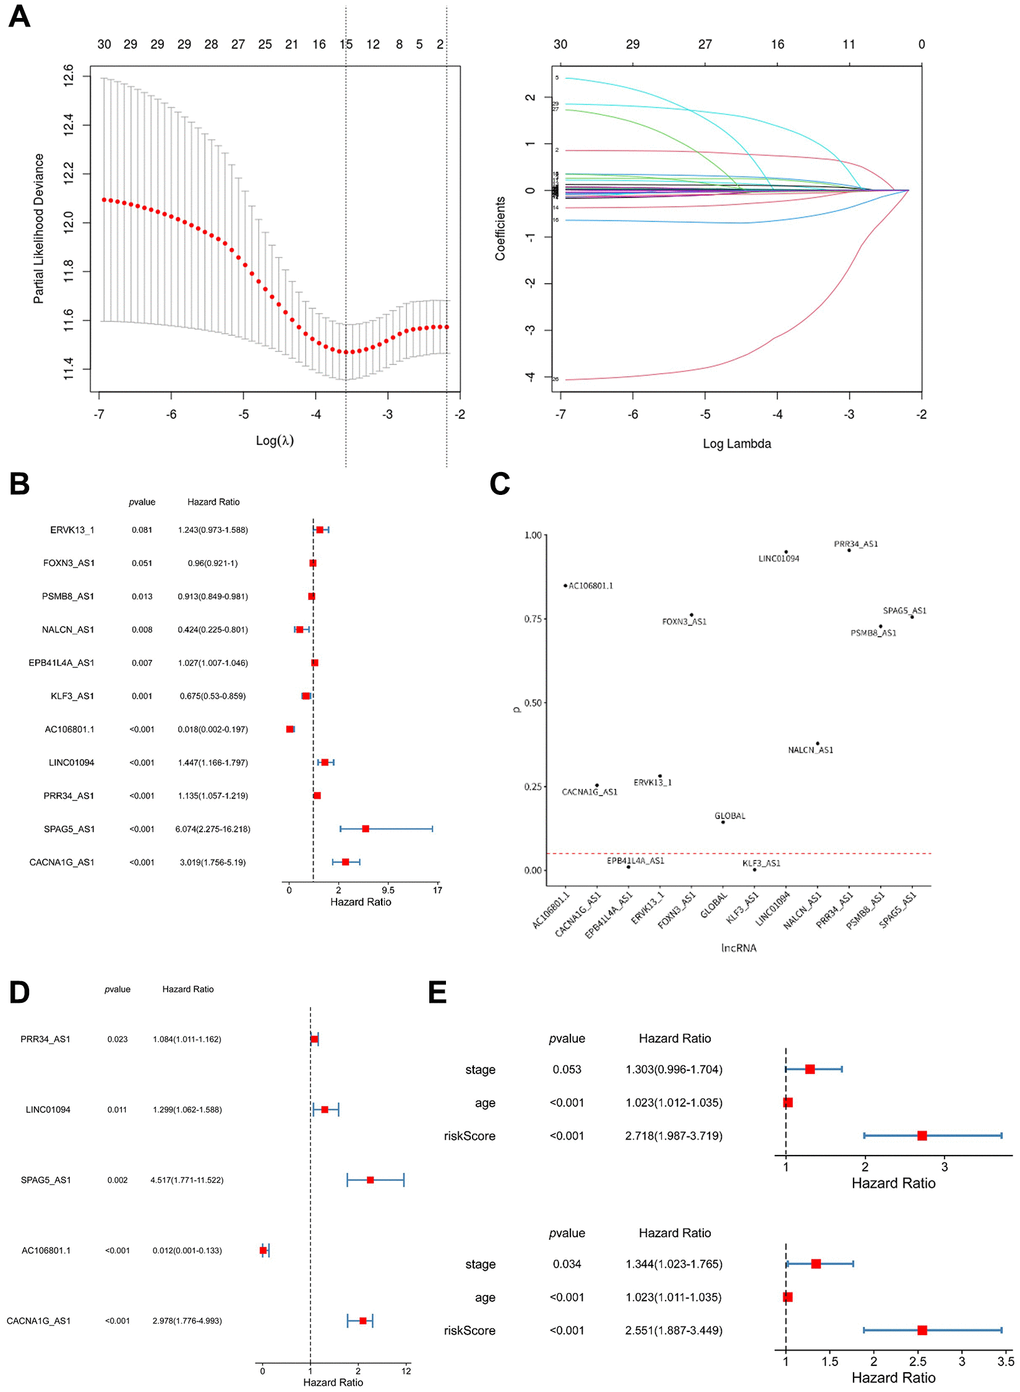 Construction of a prognostic model consisting of five anoikis-related lncRNAs. (A) LASSO regression analysis and partial likelihood deviance were performed to identify the prognostic lncRNAs. (B) Four lncRNAs were excluded based on the multivariate Cox regression analysis. (C) Two lncRNAs were excluded based on the PH assumption (proportional hazards assumption). (D) Five arlncRNAs were finally identified by performing multivariate Cox regression analysis. (E) Univariate and multivariate Cox regression analysis was conducted to determine the independent risk factors.